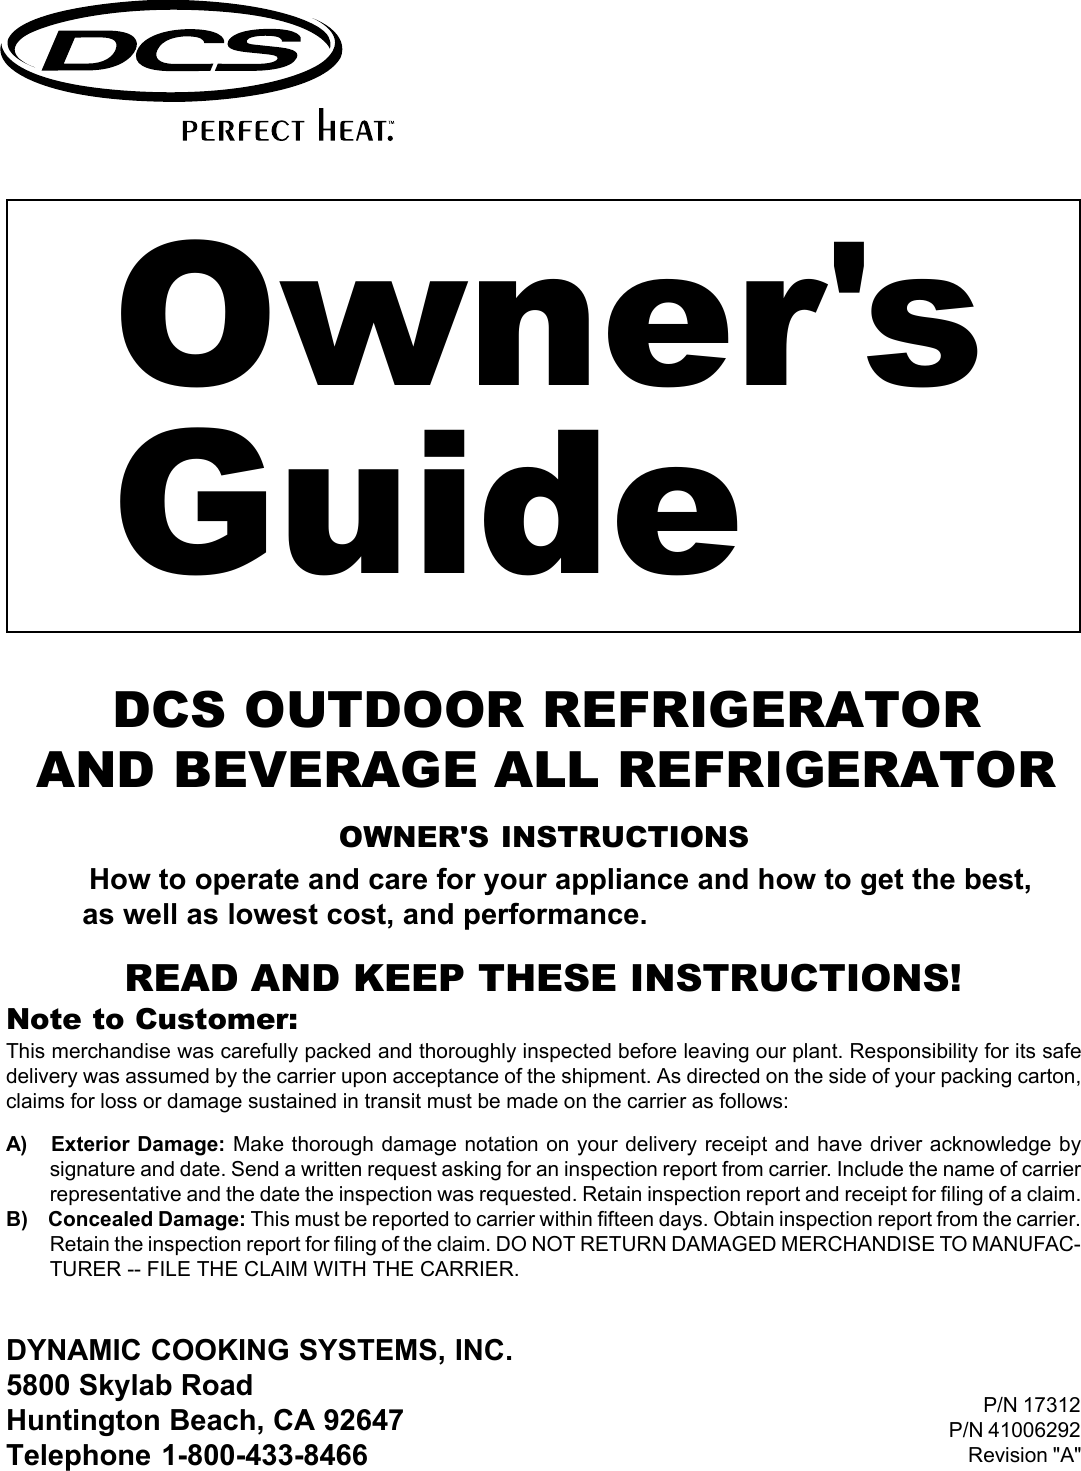 Page 1 of 8 - Dcs Dcs-Outdoor-Refrigerator-And-Beverage-All-Refrigerator-Users-Manual- MarvelOG41006292  Dcs-outdoor-refrigerator-and-beverage-all-refrigerator-users-manual